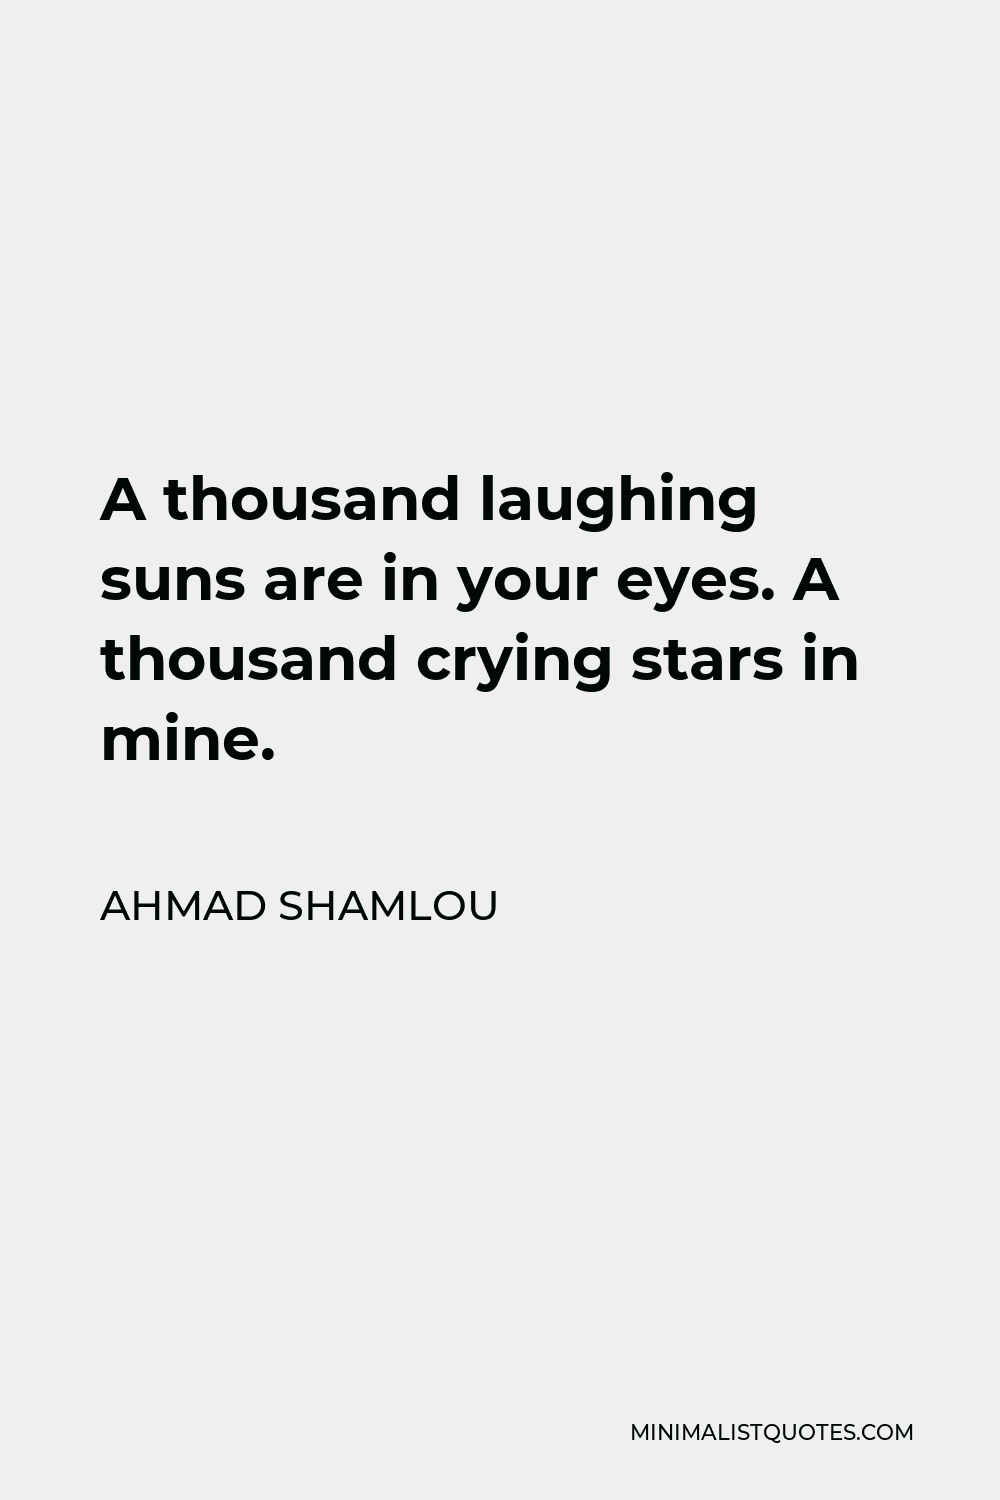 Ahmad Shamlou Quote - A thousand laughing suns are in your eyes. A thousand crying stars in mine.